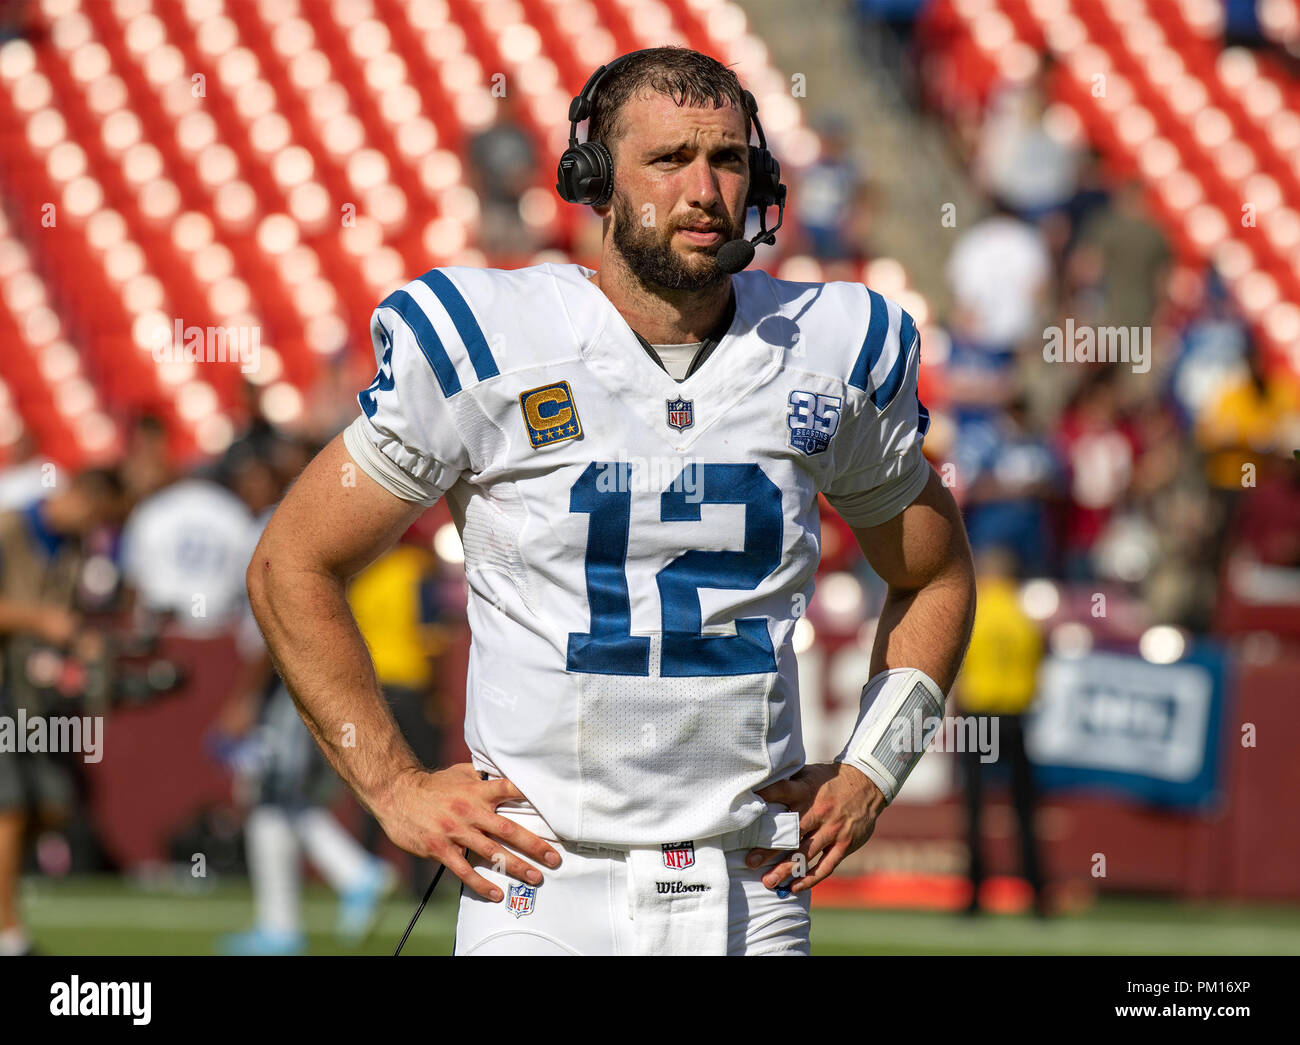 Indianapolis Colts quarterback Andrew Luck (12) is interviewed following  the game against the Washington Redskins at FedEx Field in Landover,  Maryland on Sunday, September 16, 2018. The Colts won the game 21 